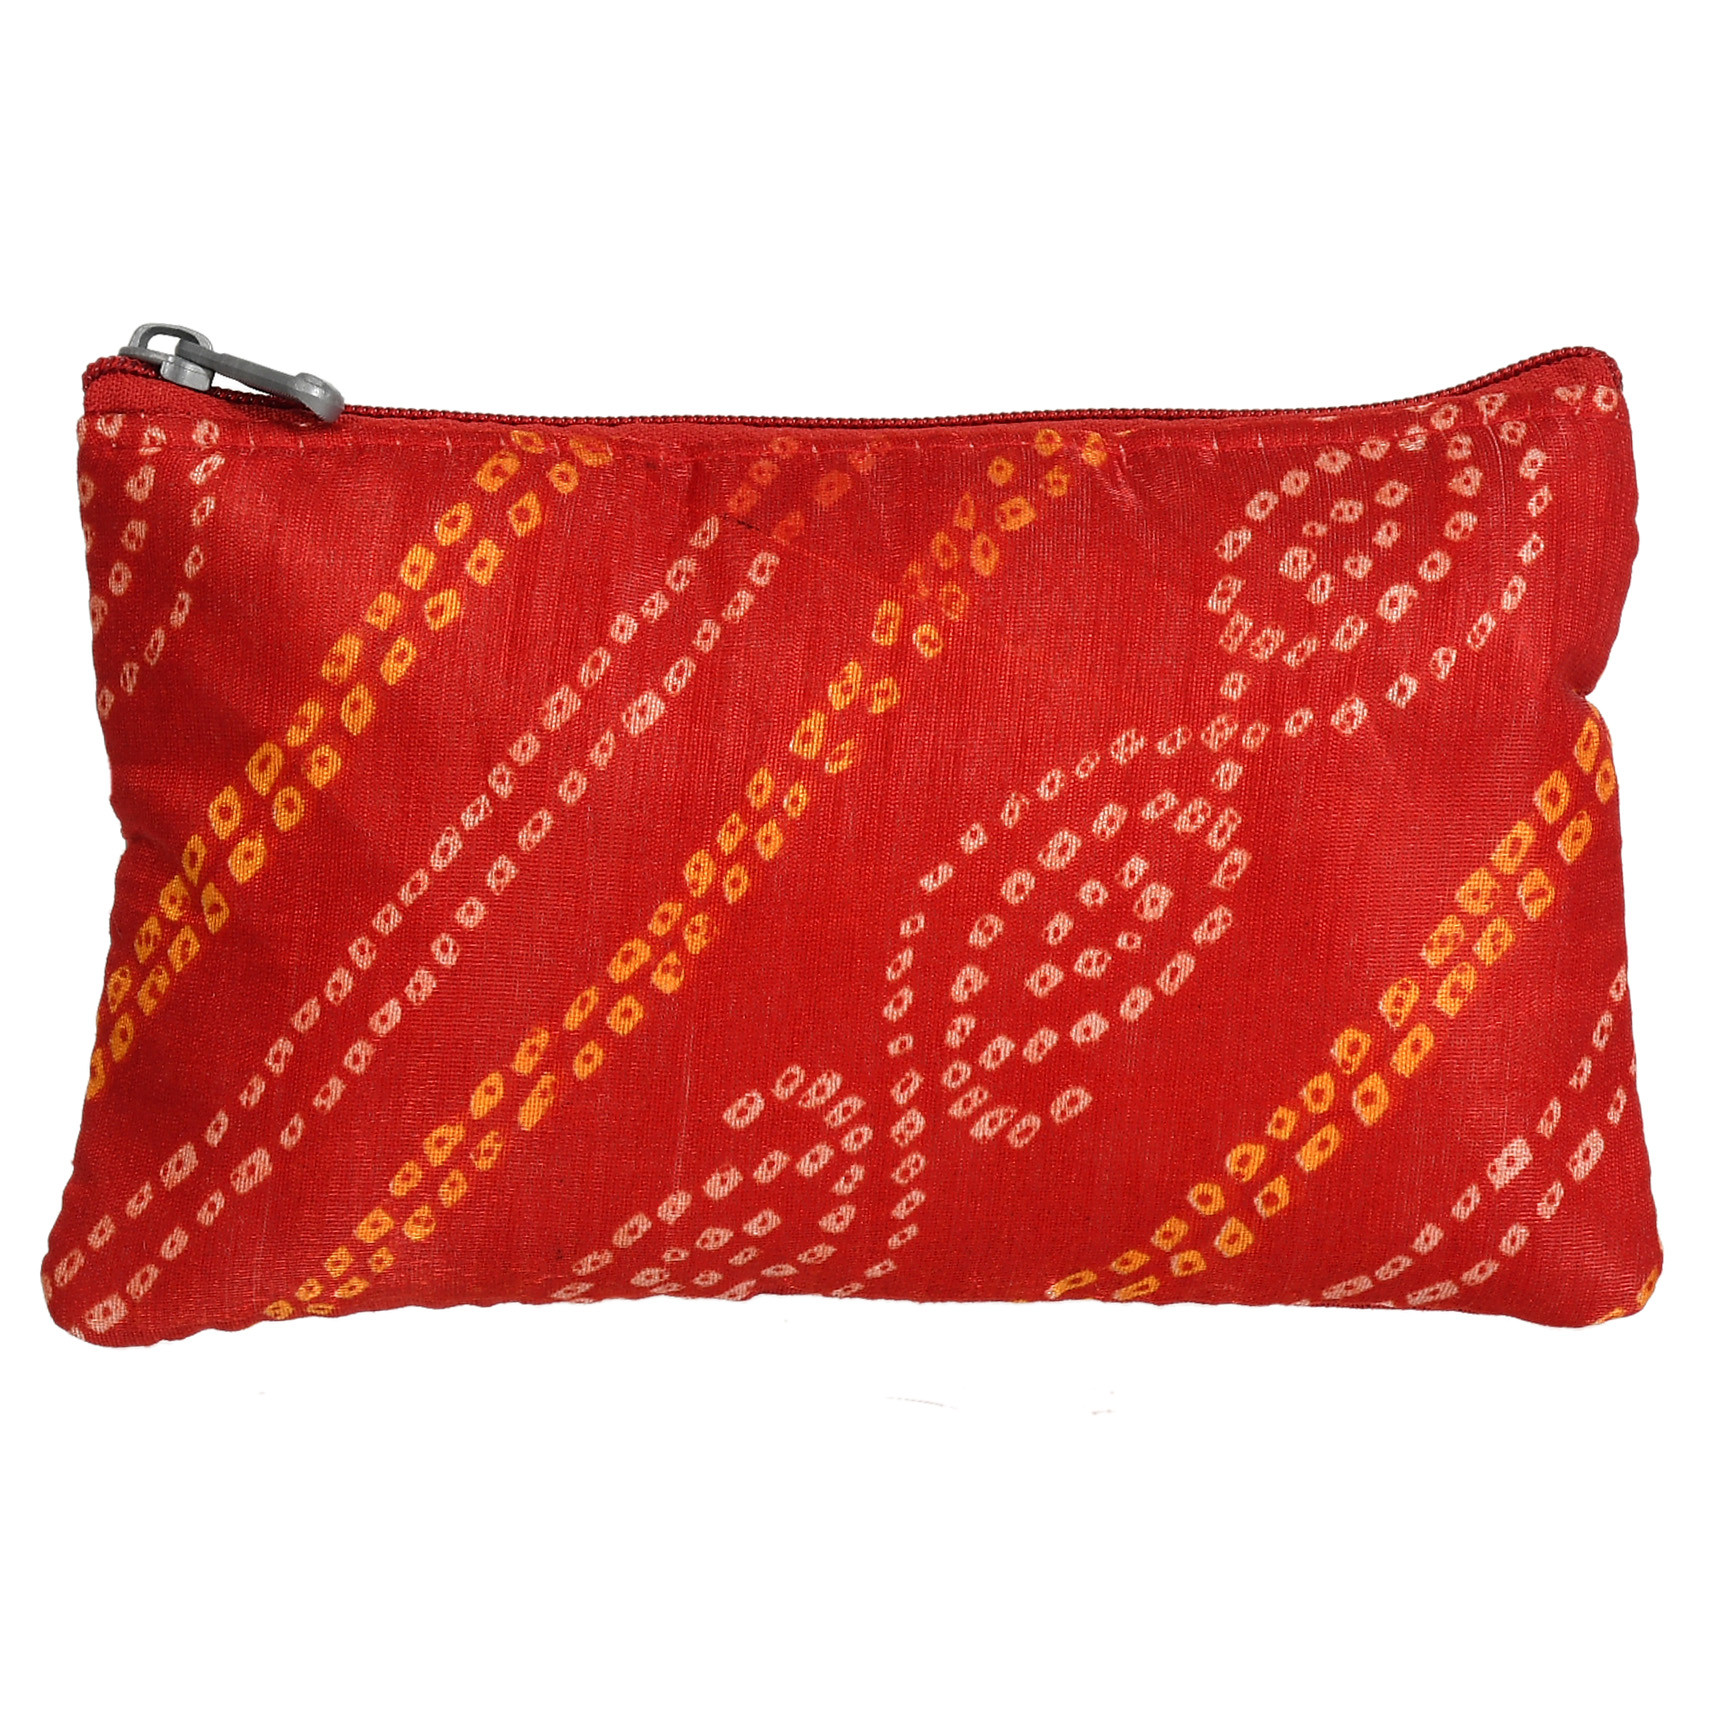 Kuber Industries Polyester Purse For Woman/Girl Set Of 2 (Yellow & Red) 54KM4347